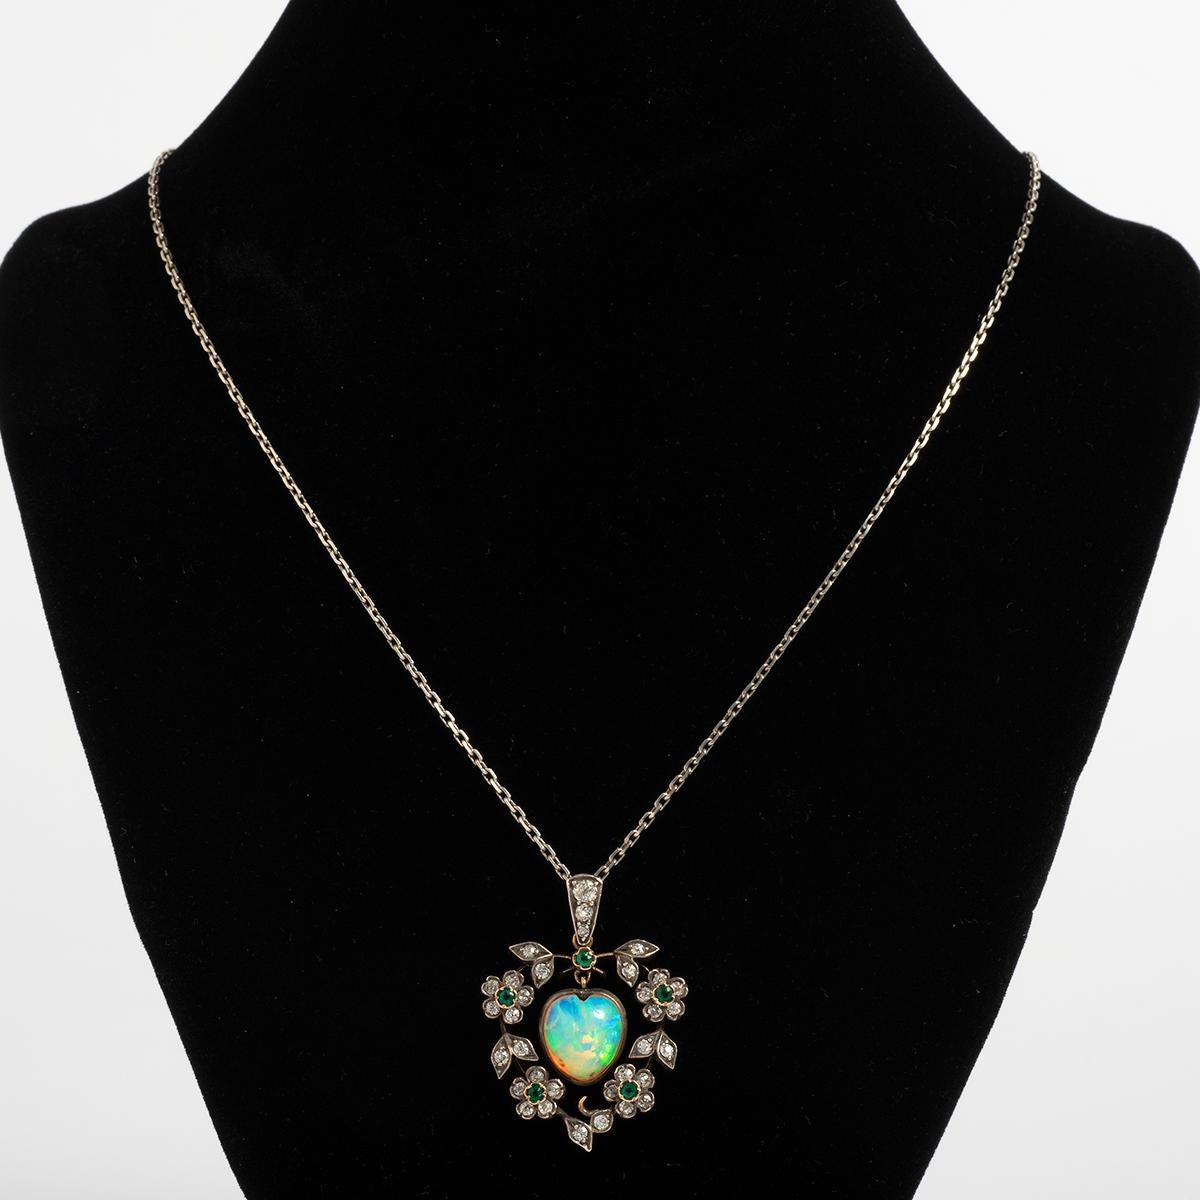 Round Cut Victorian 18 Carat White Gold Necklace with Diamonds, Emeralds and Opal Stone. For Sale